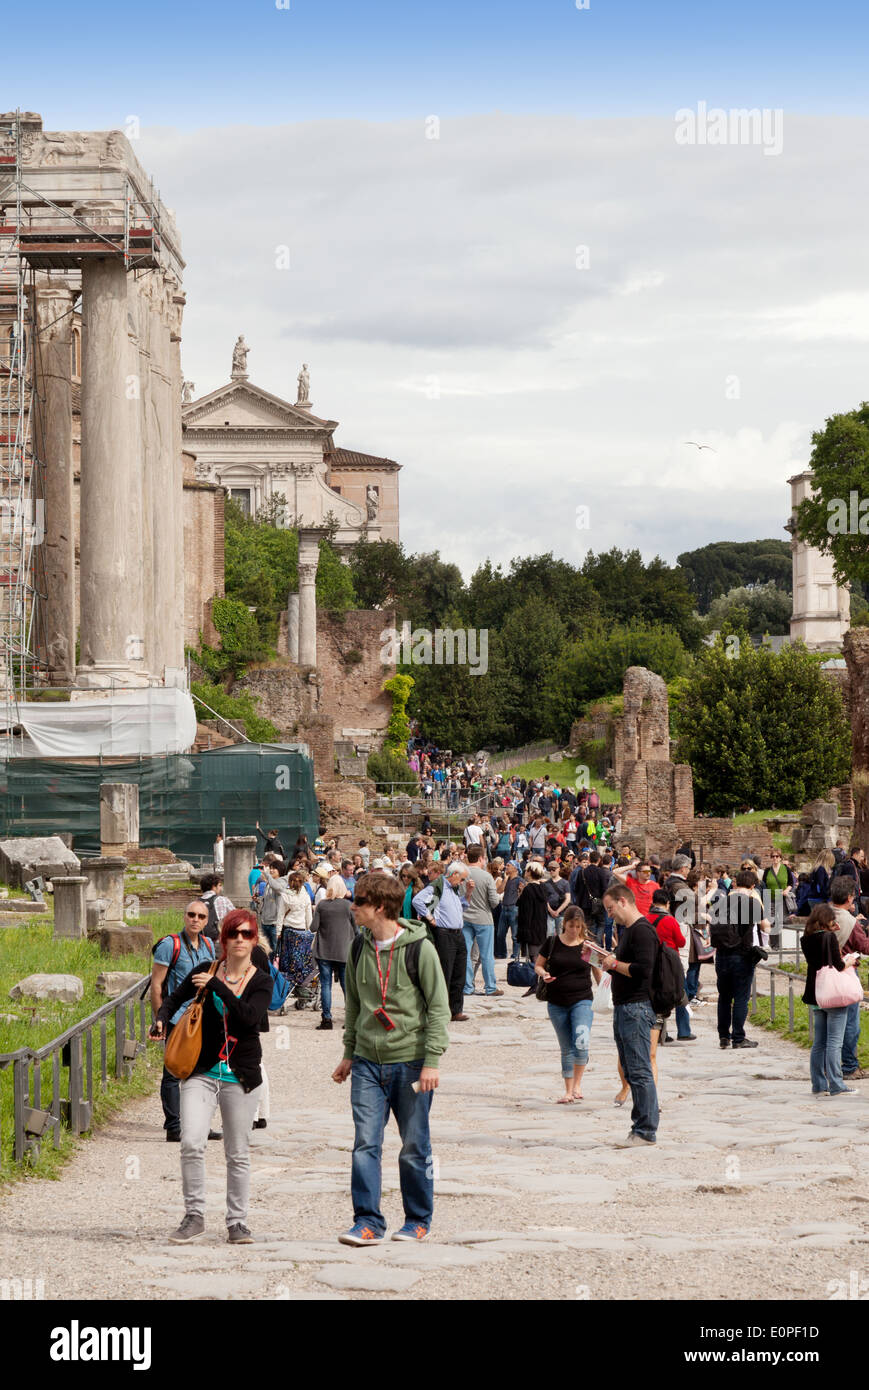 People walking in the ancient Roman Forum, Rome Italy Europe Stock Photo